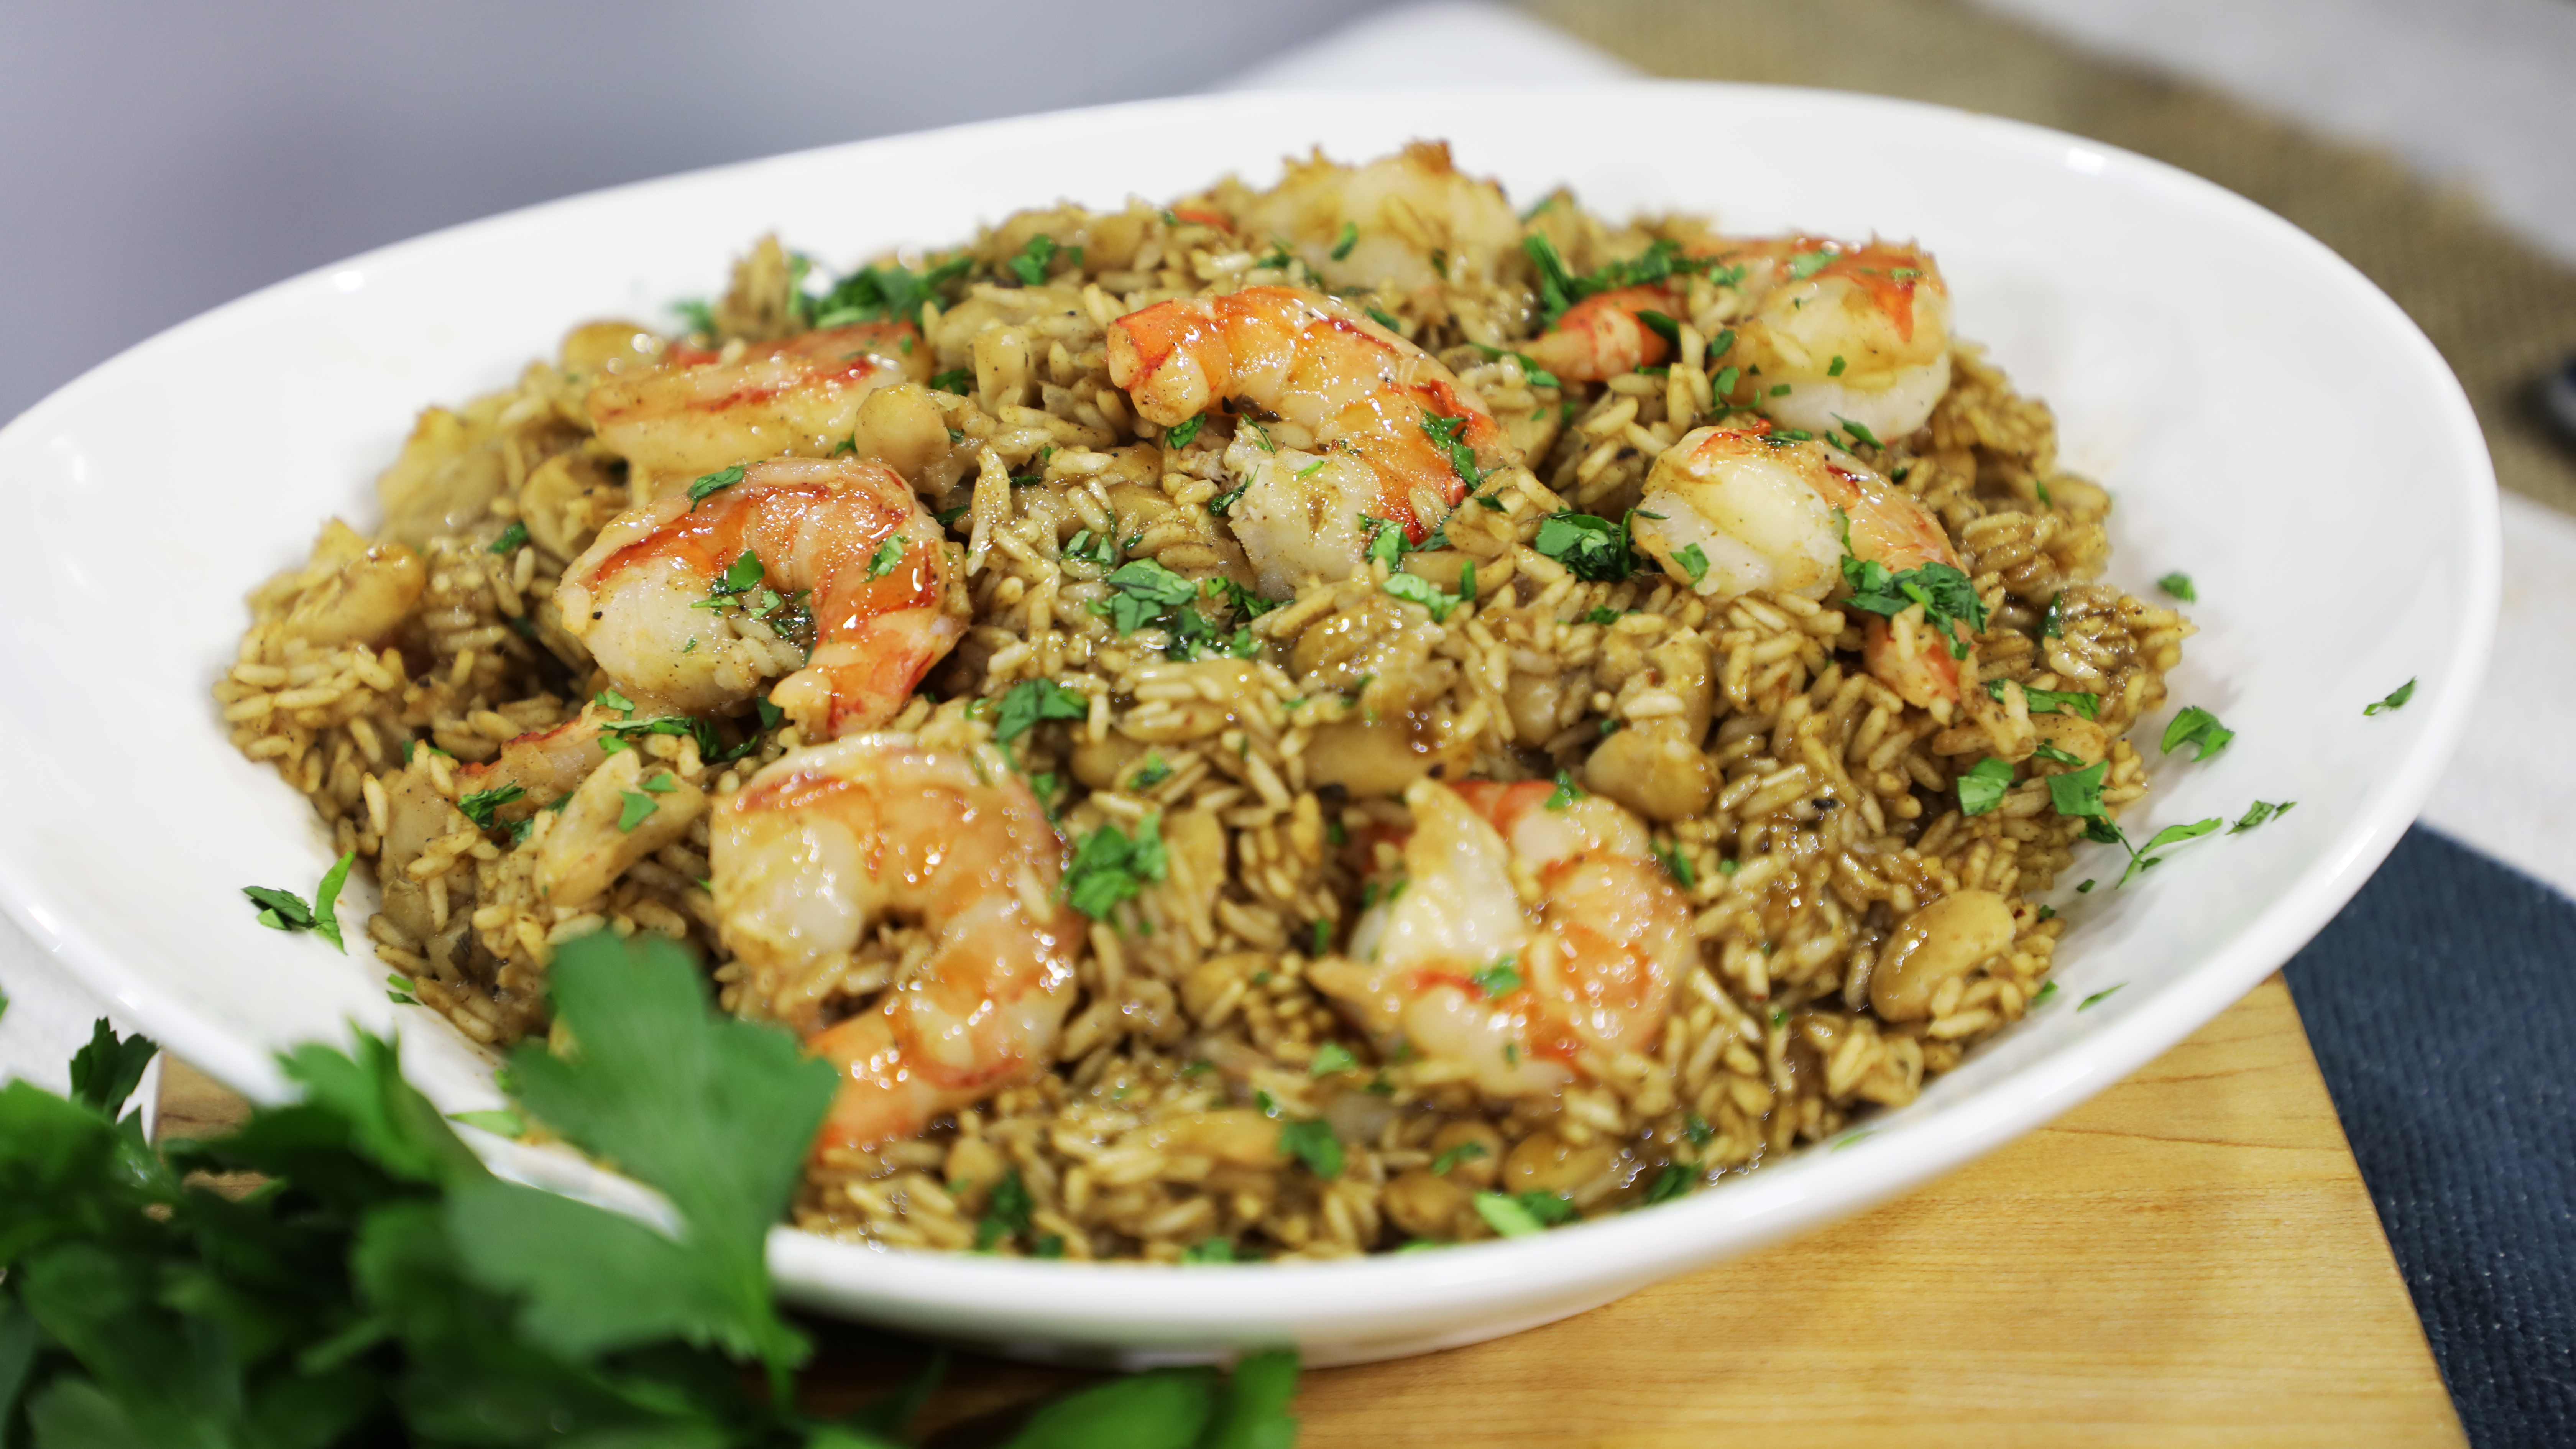 Jerk shrimp with rice and beans